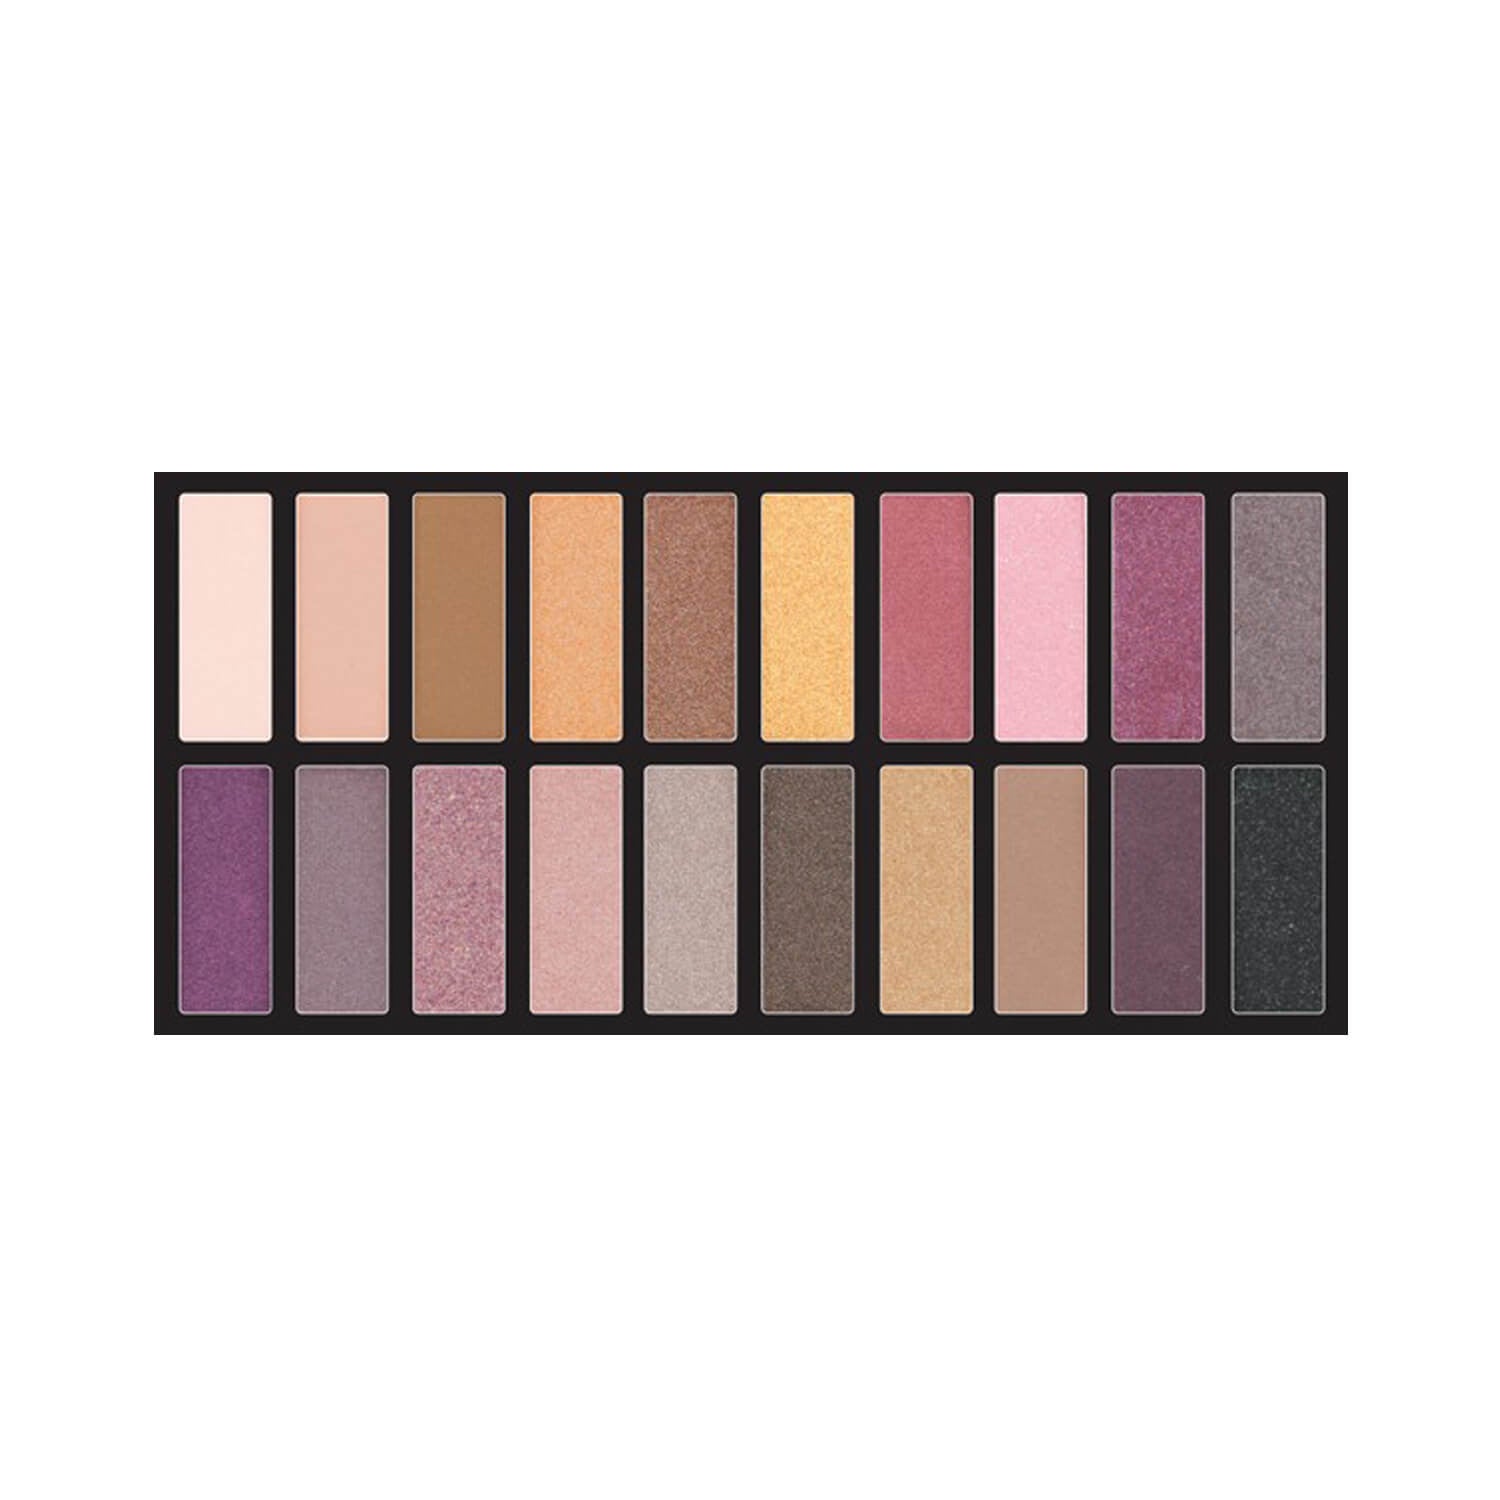 Coastal Scents Revealed 3 Palette 20 Eye Shadow Colors